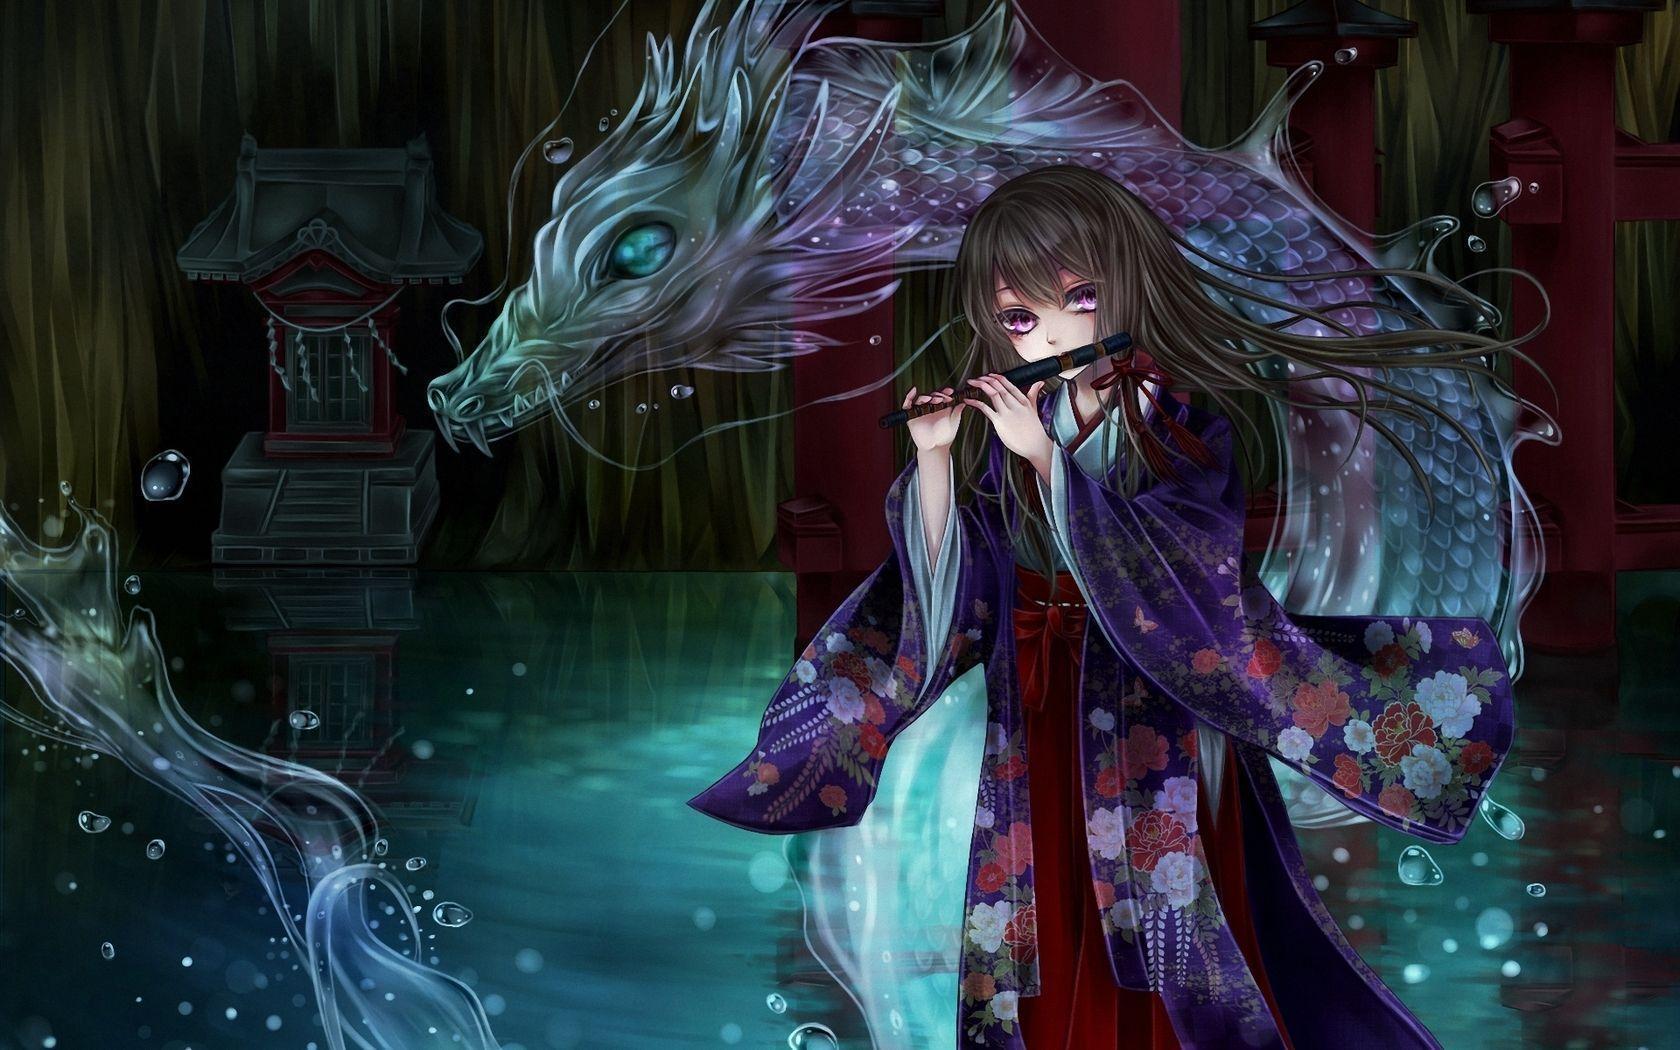 ponytail, long hair, anime, anime girls, Chinese dragon, portrait display,  dragon, creature, weapon, snow, horns, sword, glowing eyes | 2160x4596  Wallpaper - wallhaven.cc